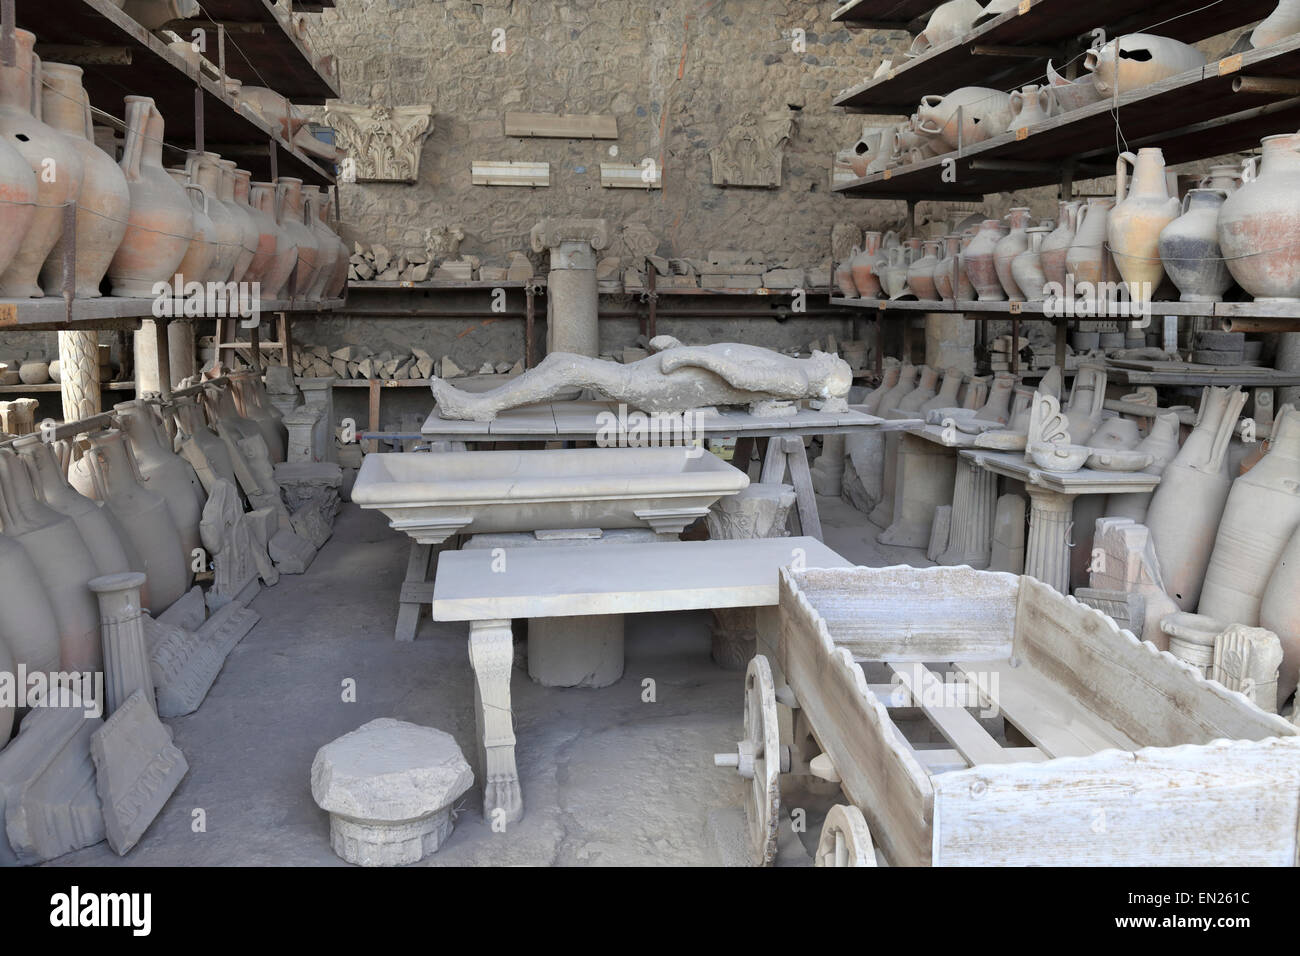 Supine body plaster cast, amphora and other archaeological material in the Granary, Pompeii, Italy. Stock Photo